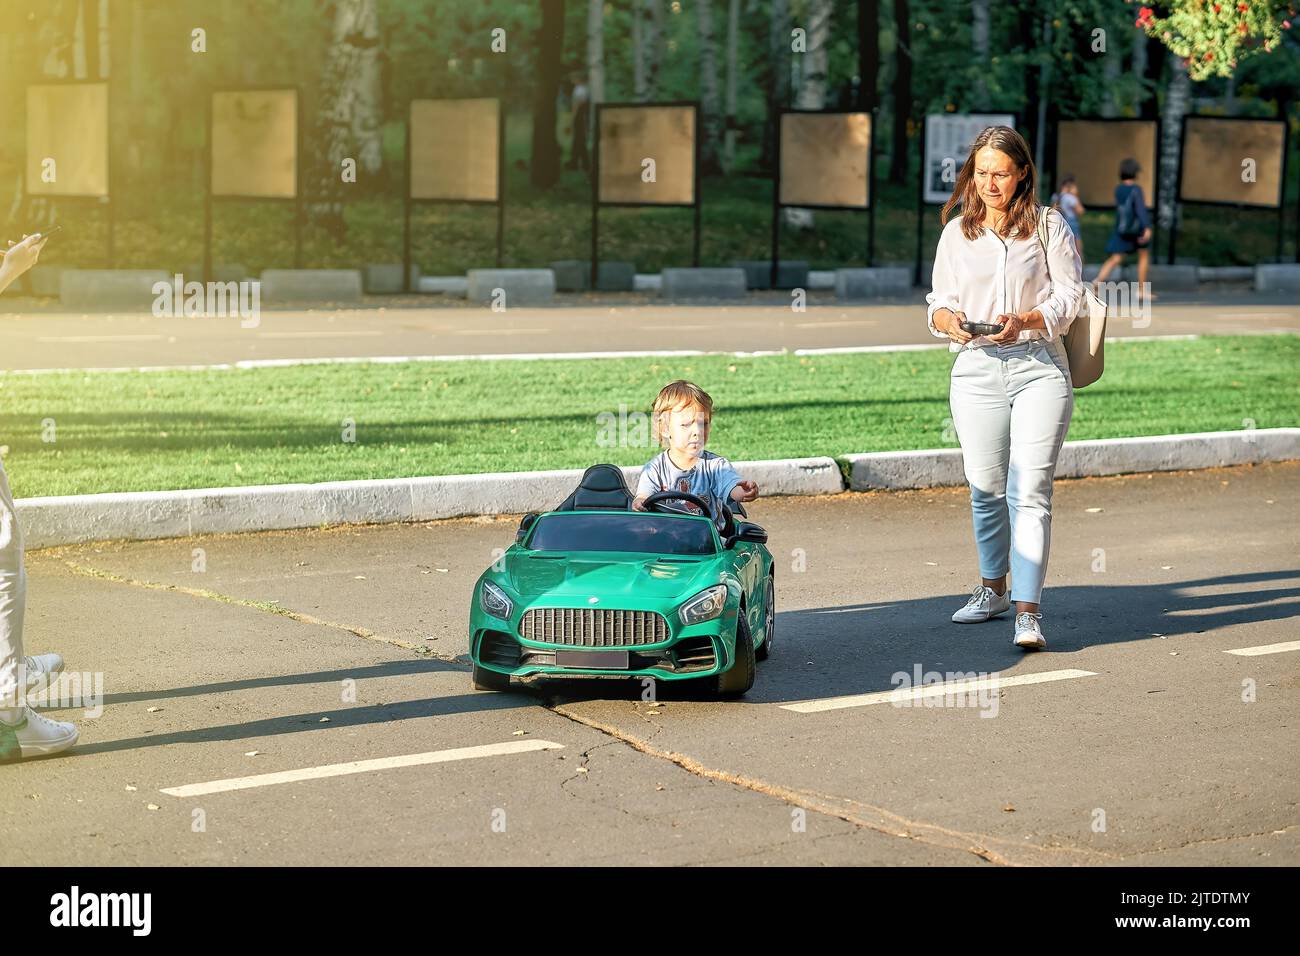 Mom controls children car with remote at walk with toddler child in public park. Toddler boy sits in green car holding steering wheel looking aside Stock Photo